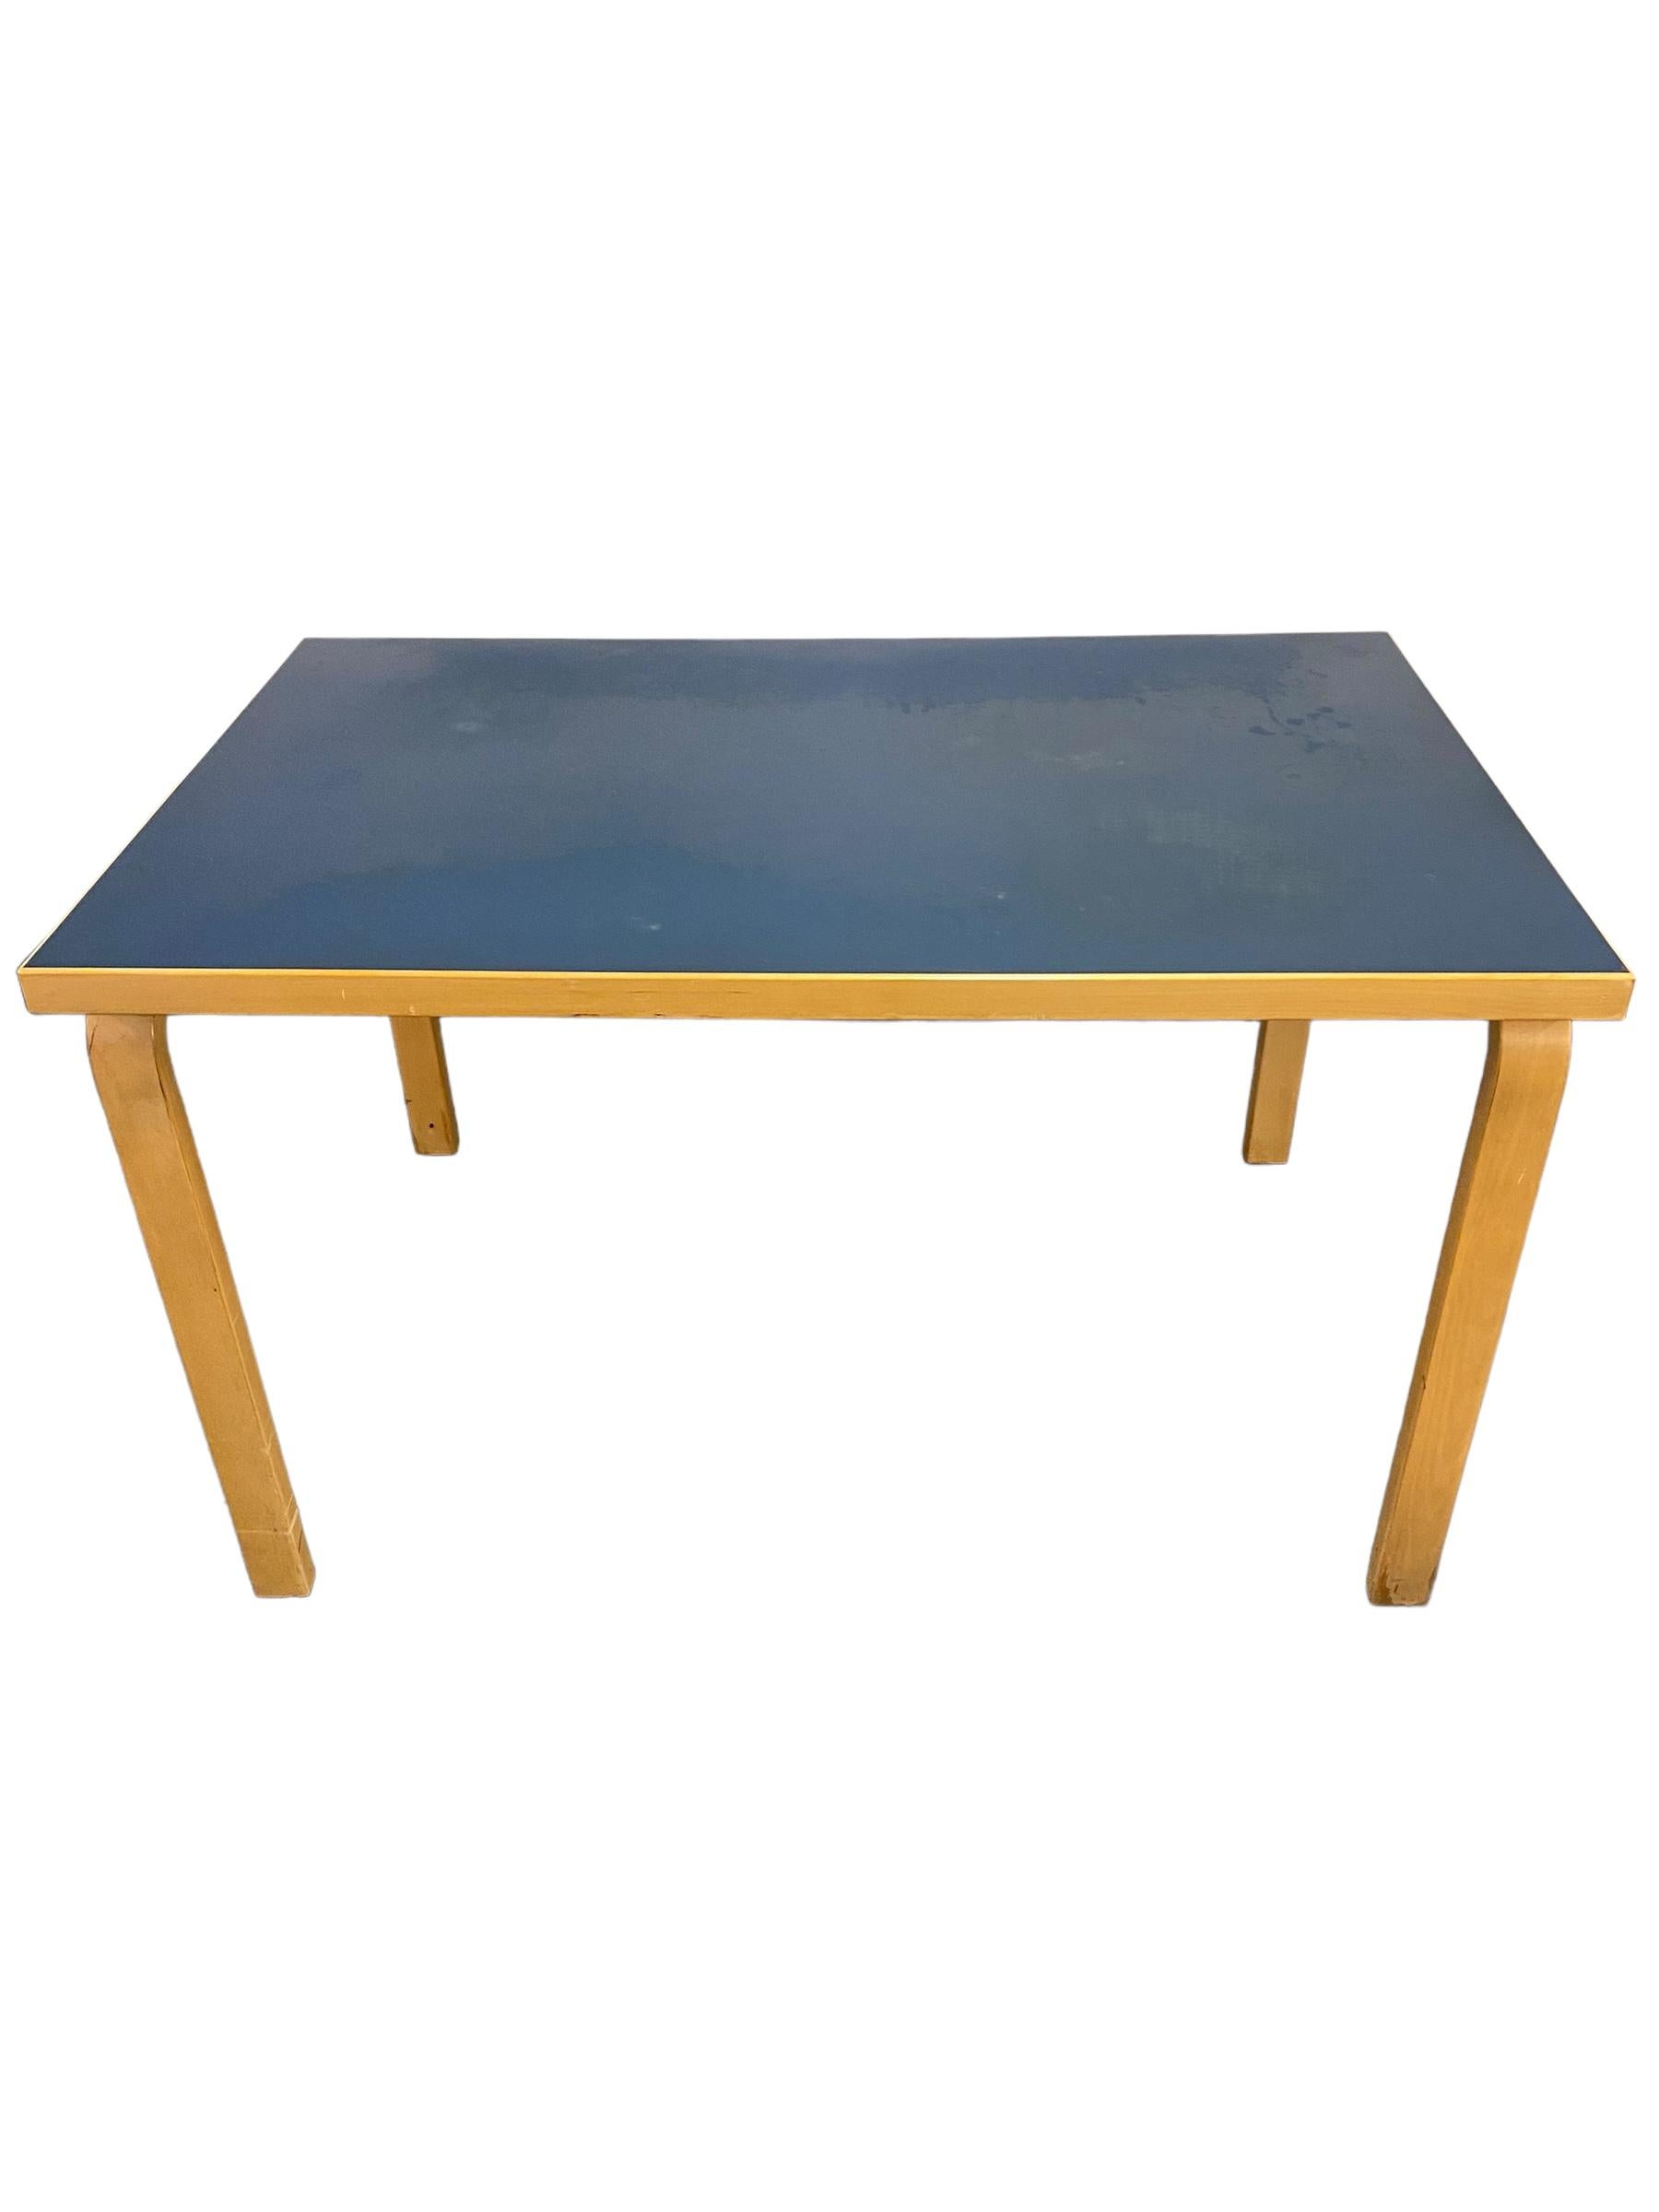 Alvar Aalto Table & 5 Model 65 Chairs In Blue Laminate, 1960s For Sale 1